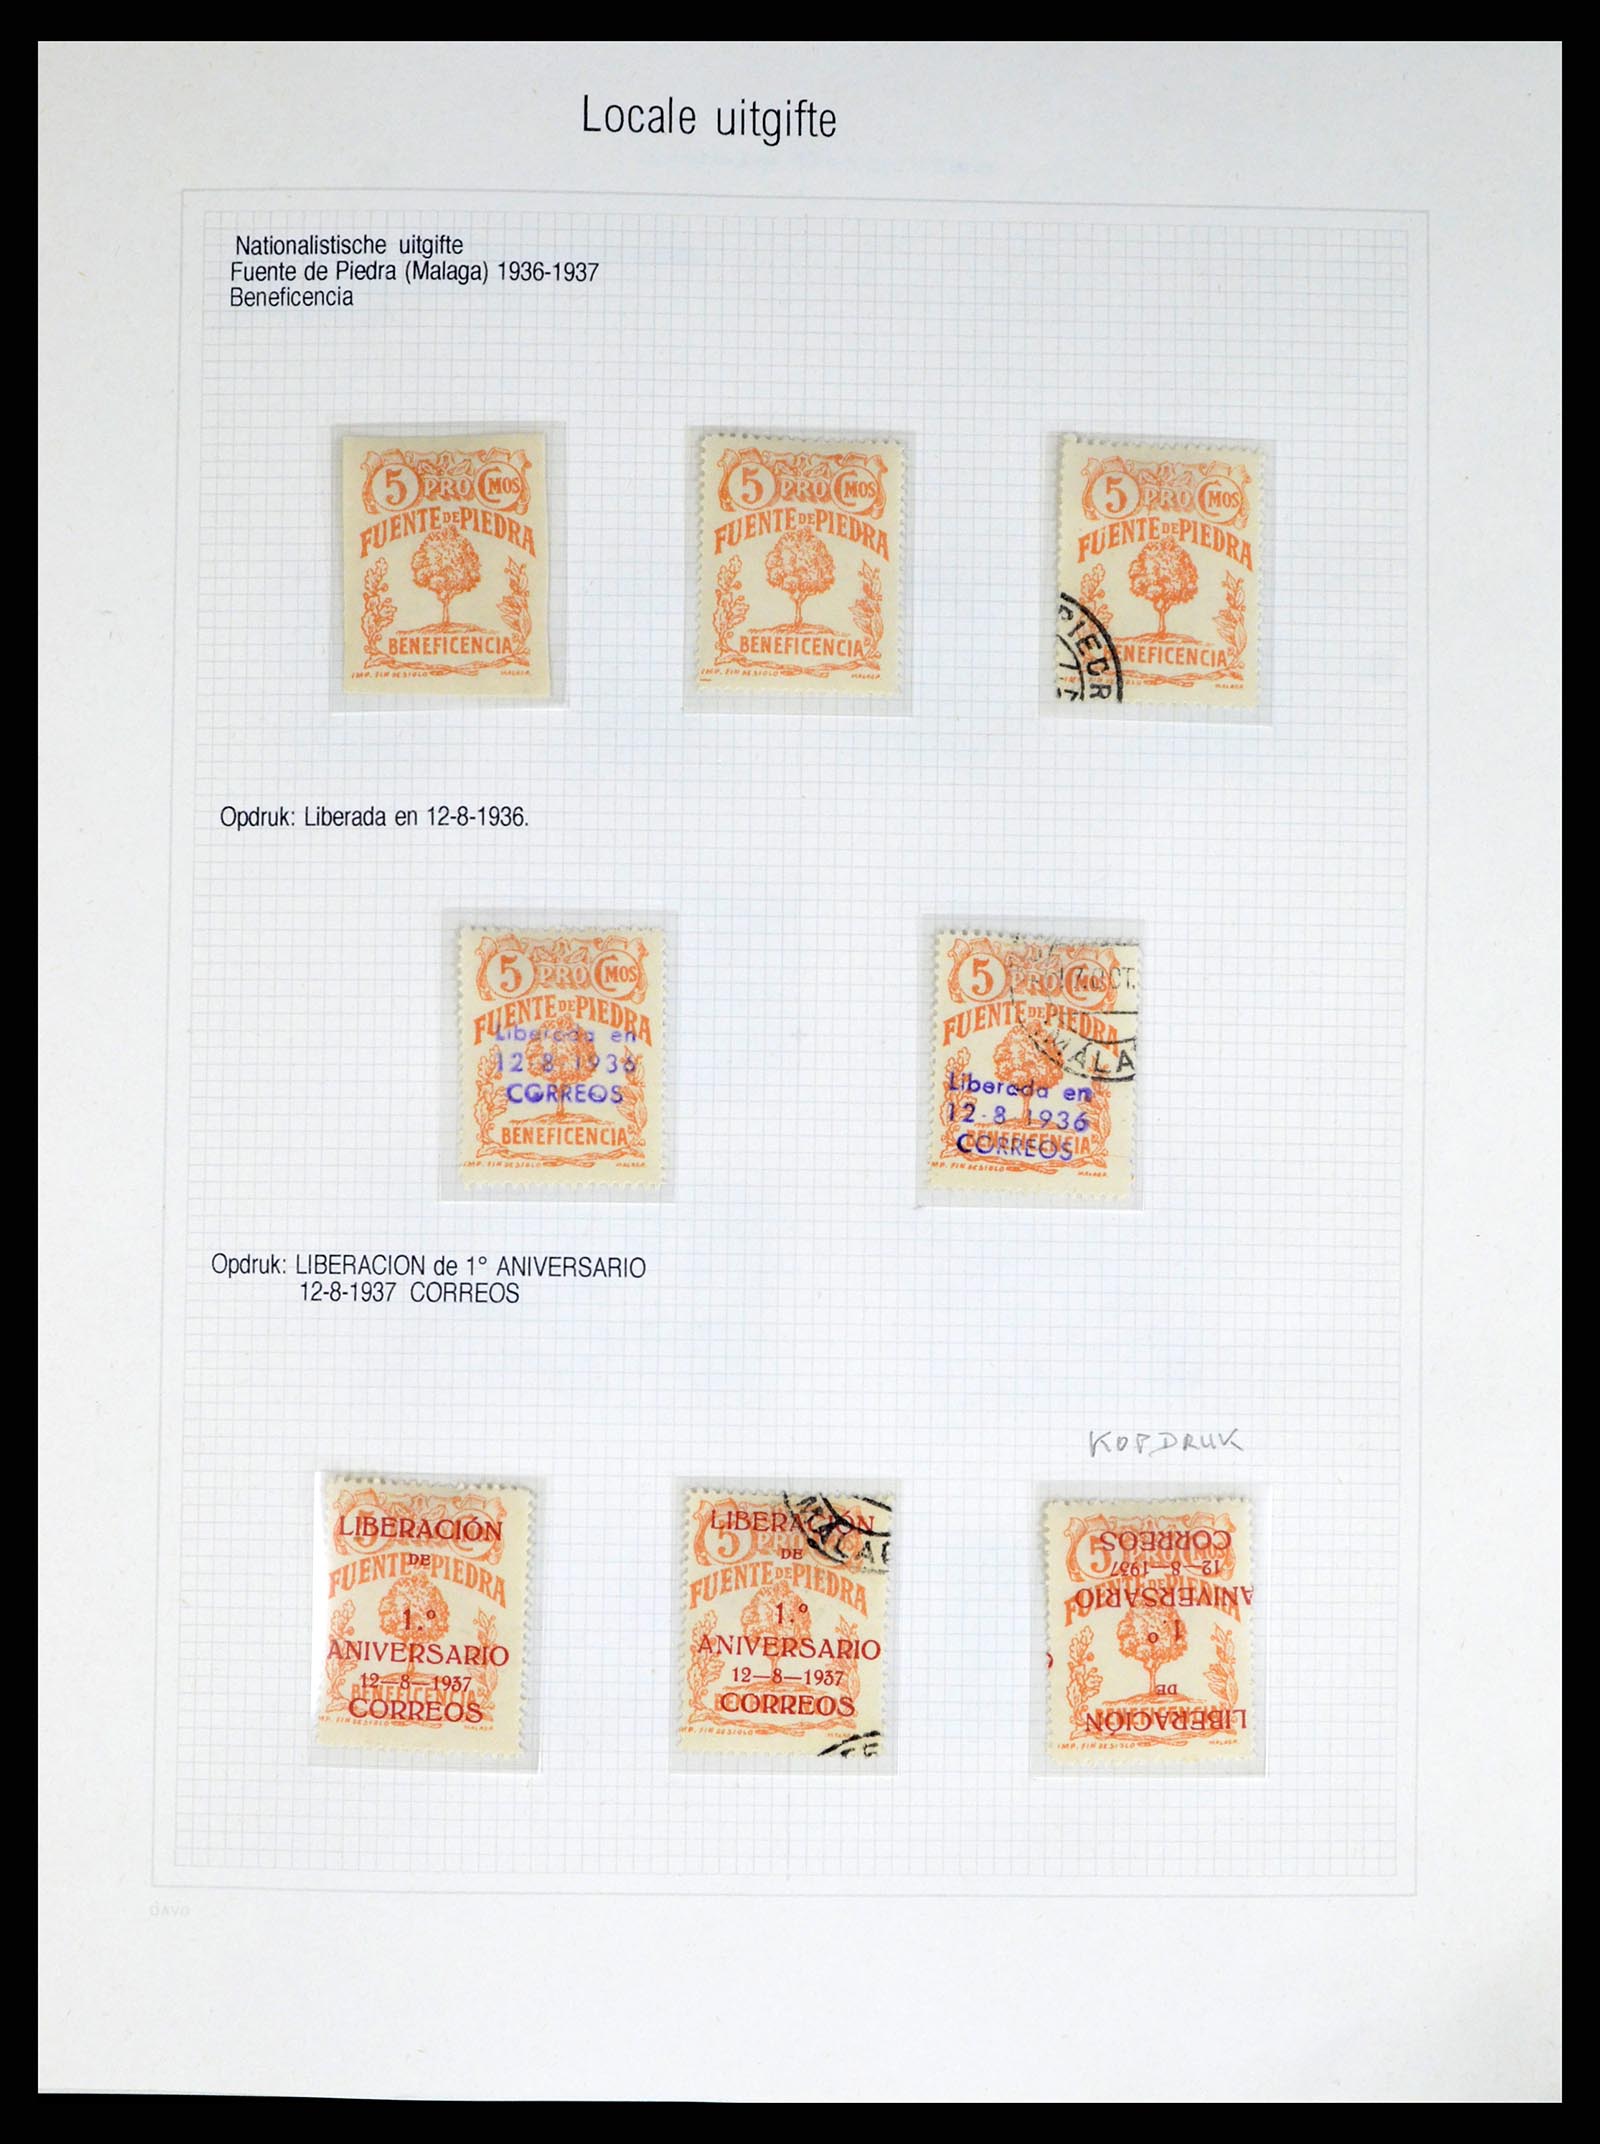 37837 082 - Stamp Collection 37837 Spansish civil war and local post 1893-1945.